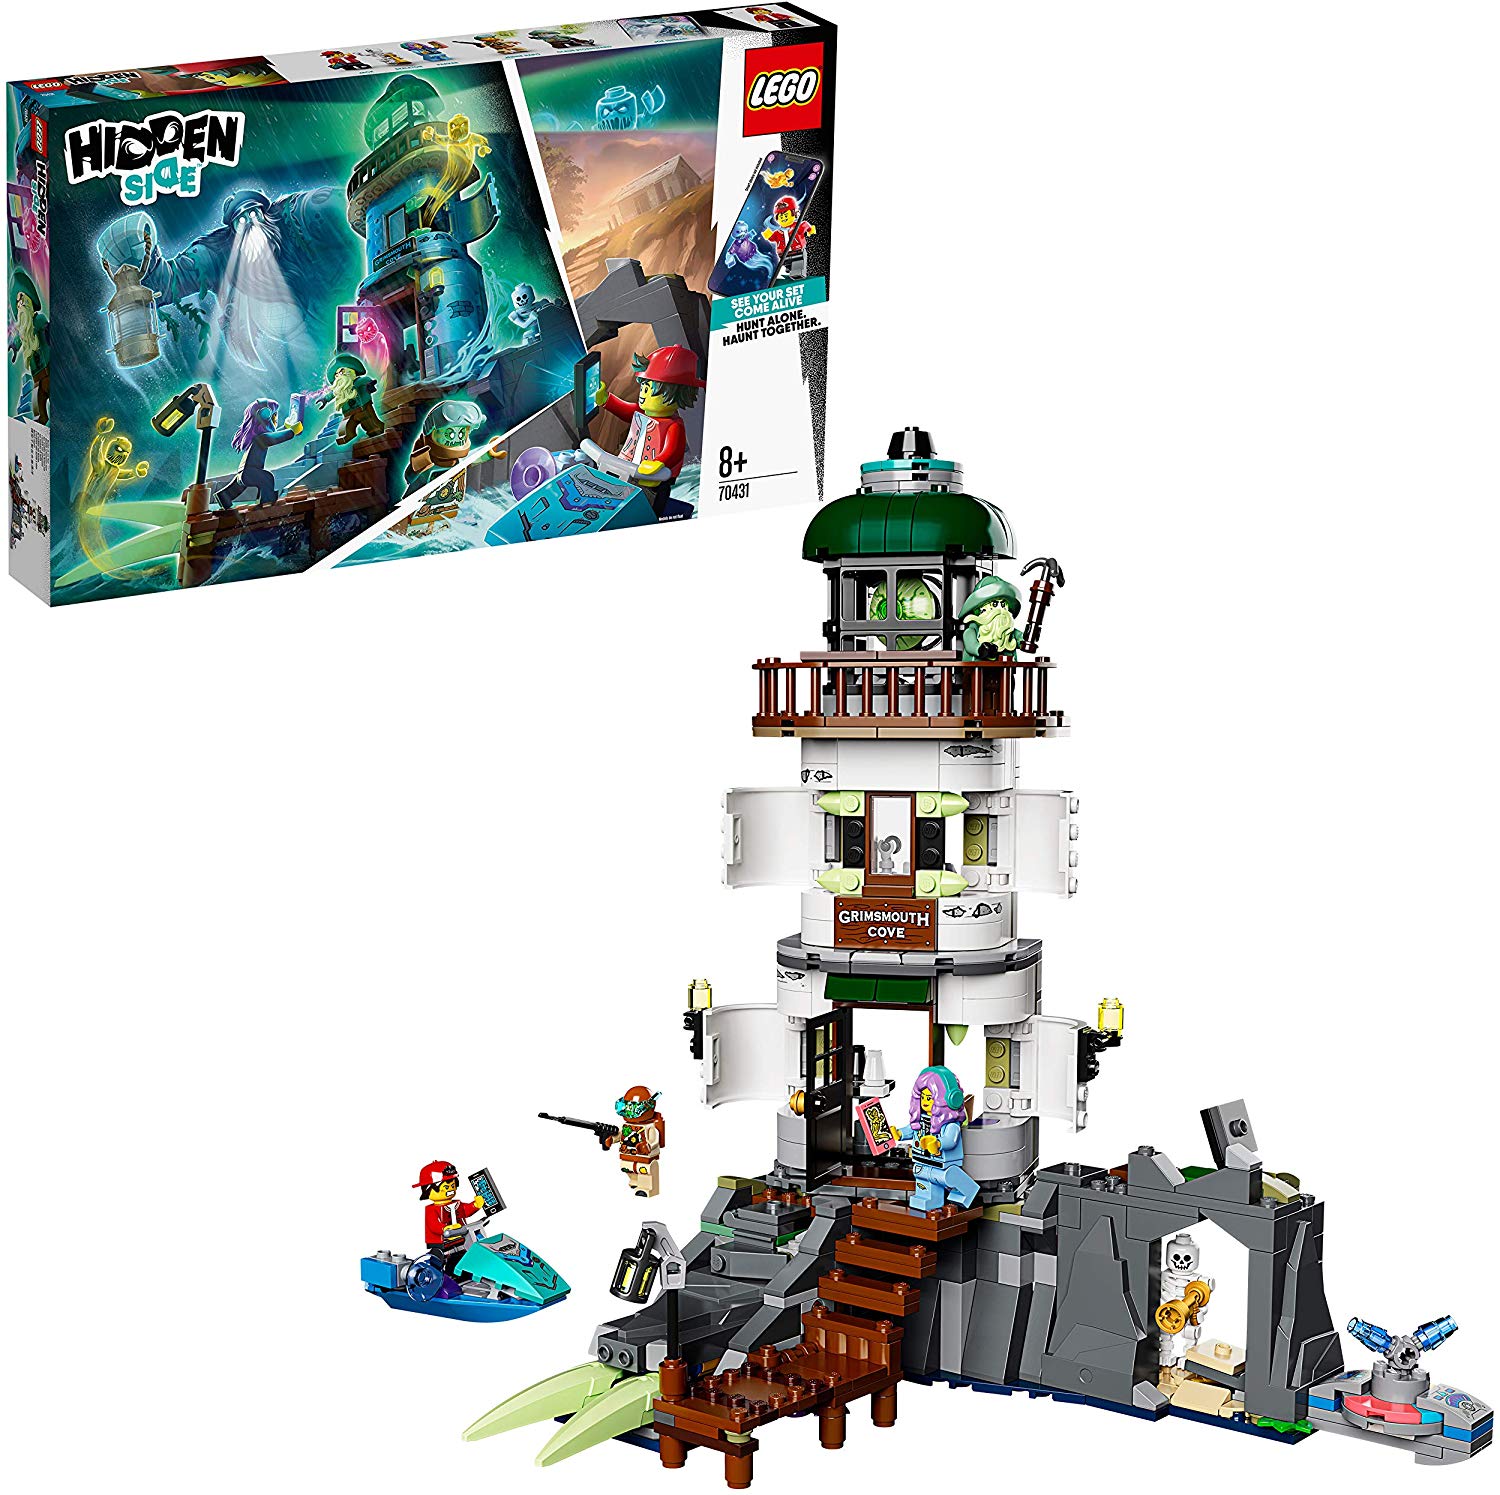 LEGO 70431 - The Lighthouse of the Darkness, Hidden Side, Construction Kit